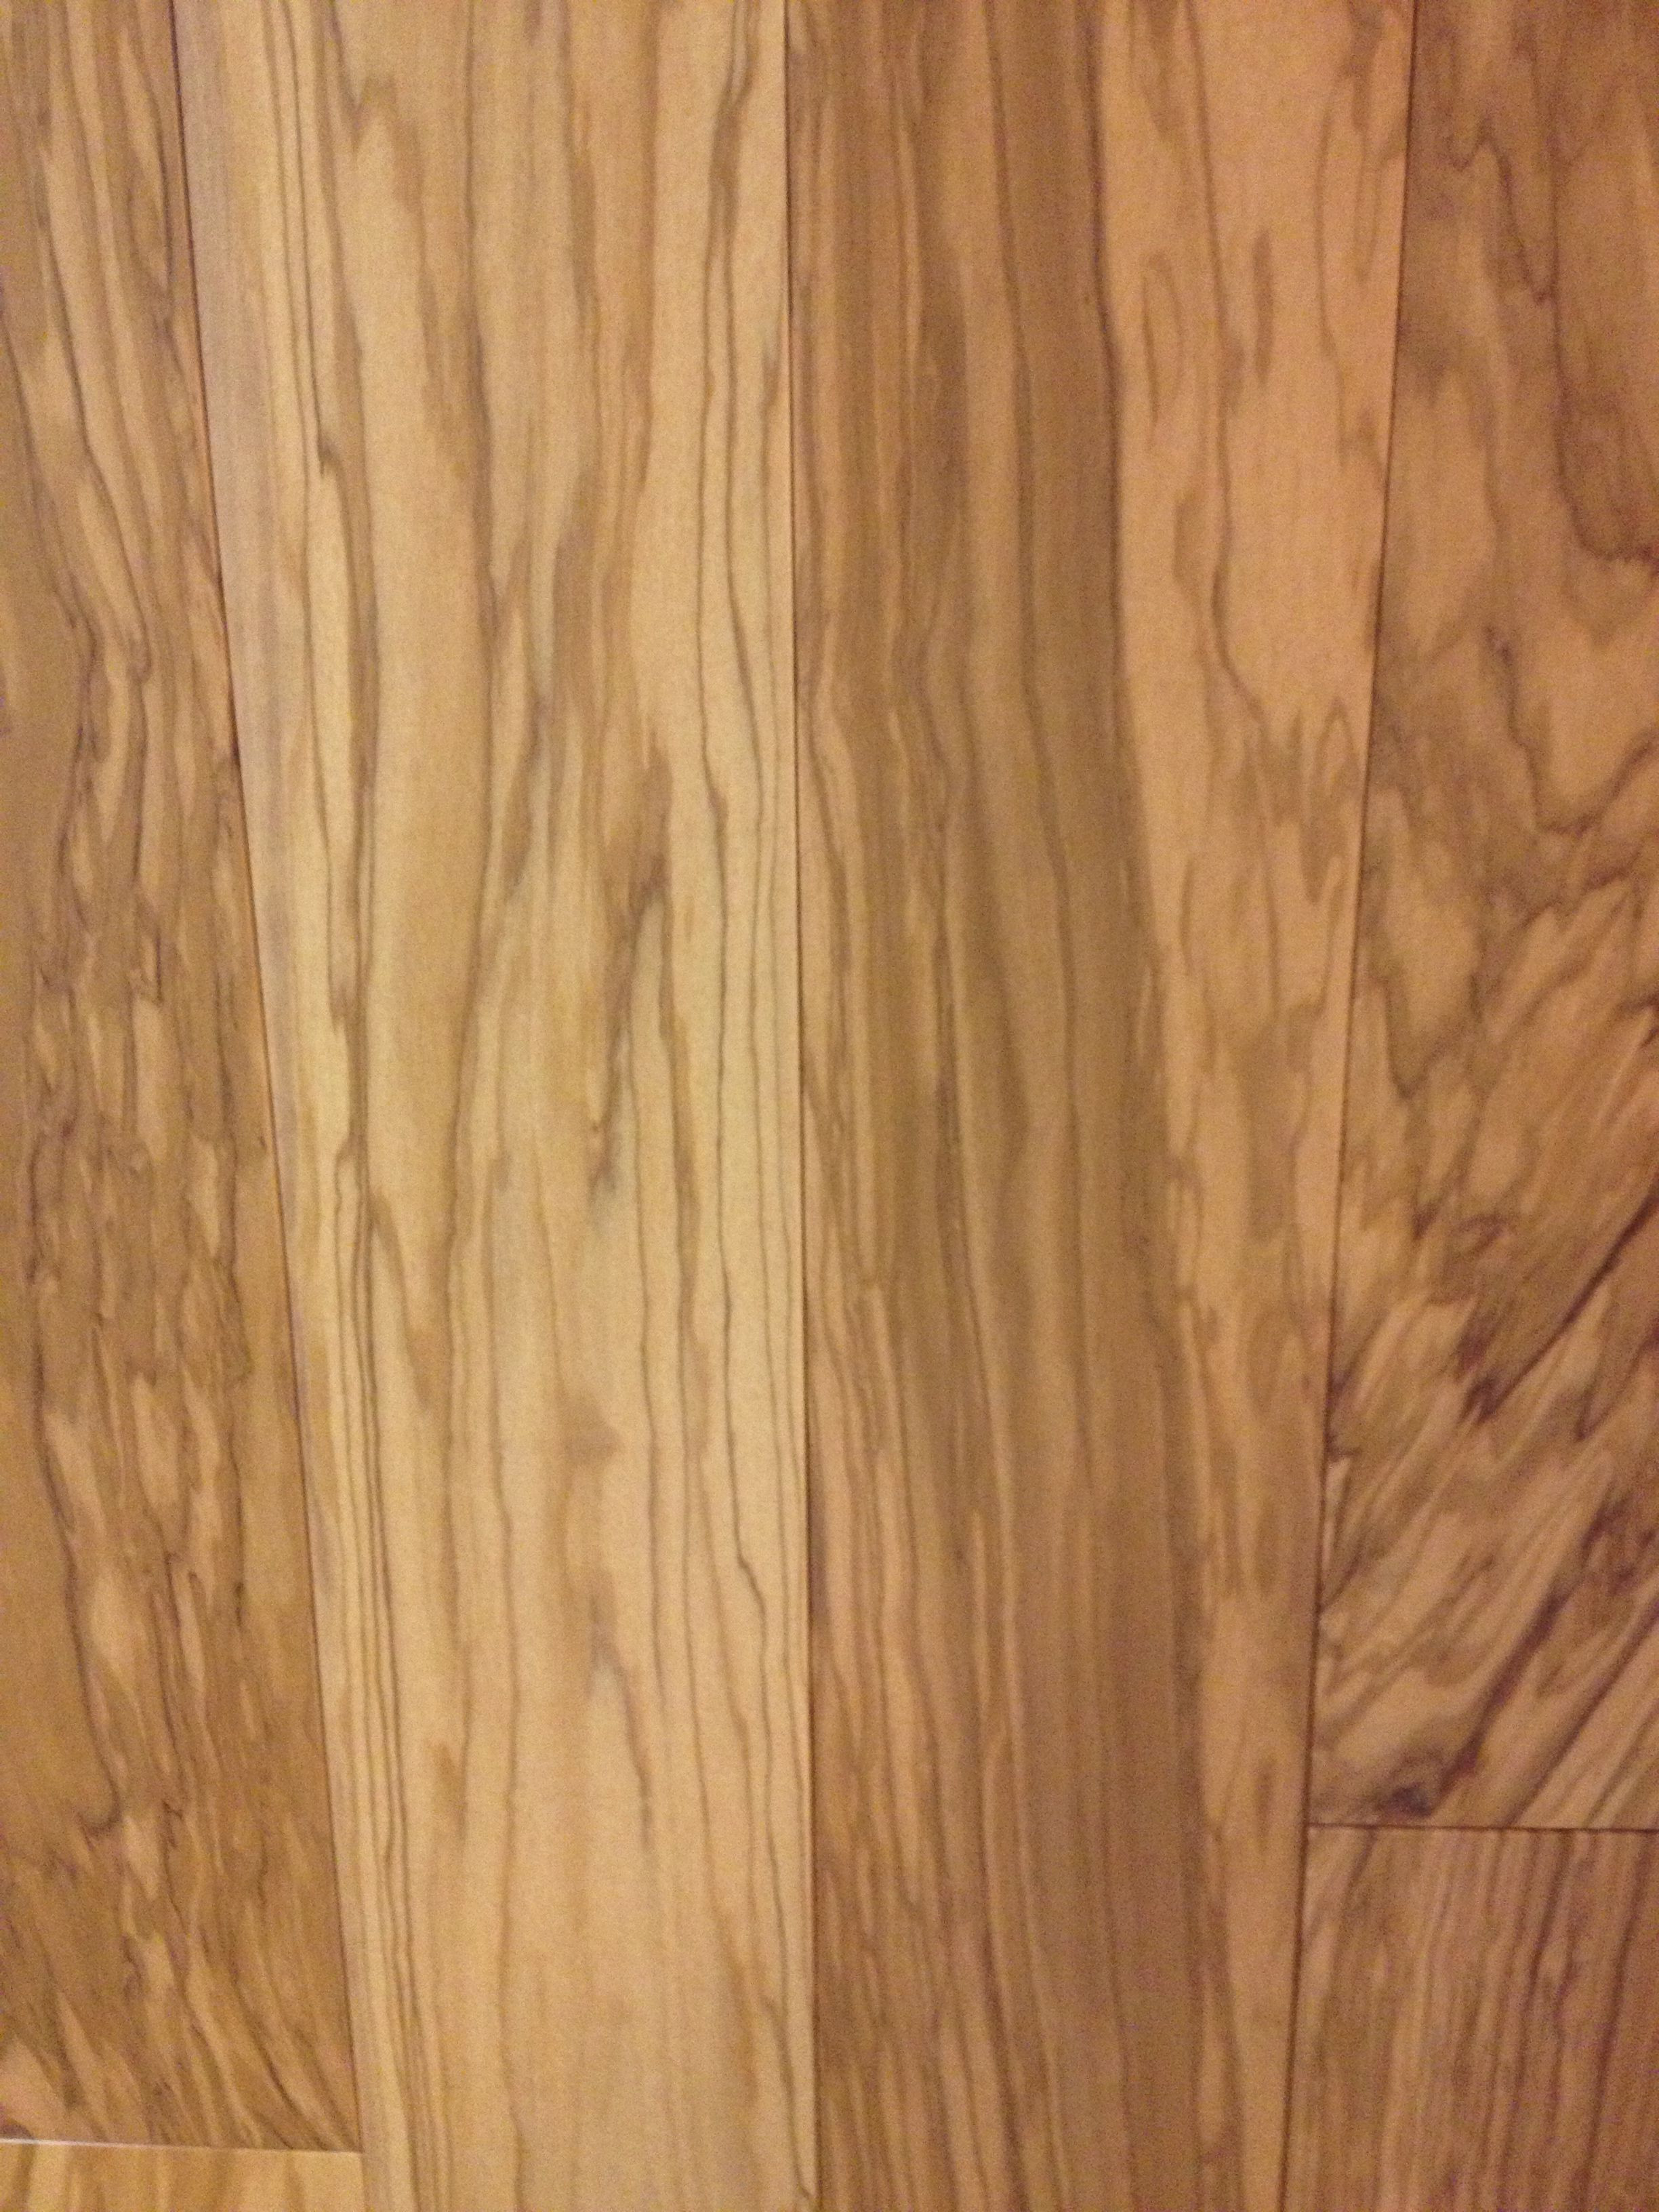 15 attractive Hardwood Floor Finish Options 2024 free download hardwood floor finish options of tuscany olive wood floor there is nothing quite like olive wood for intended for tuscany olive wood floor there is nothing quite like olive wood for turning 